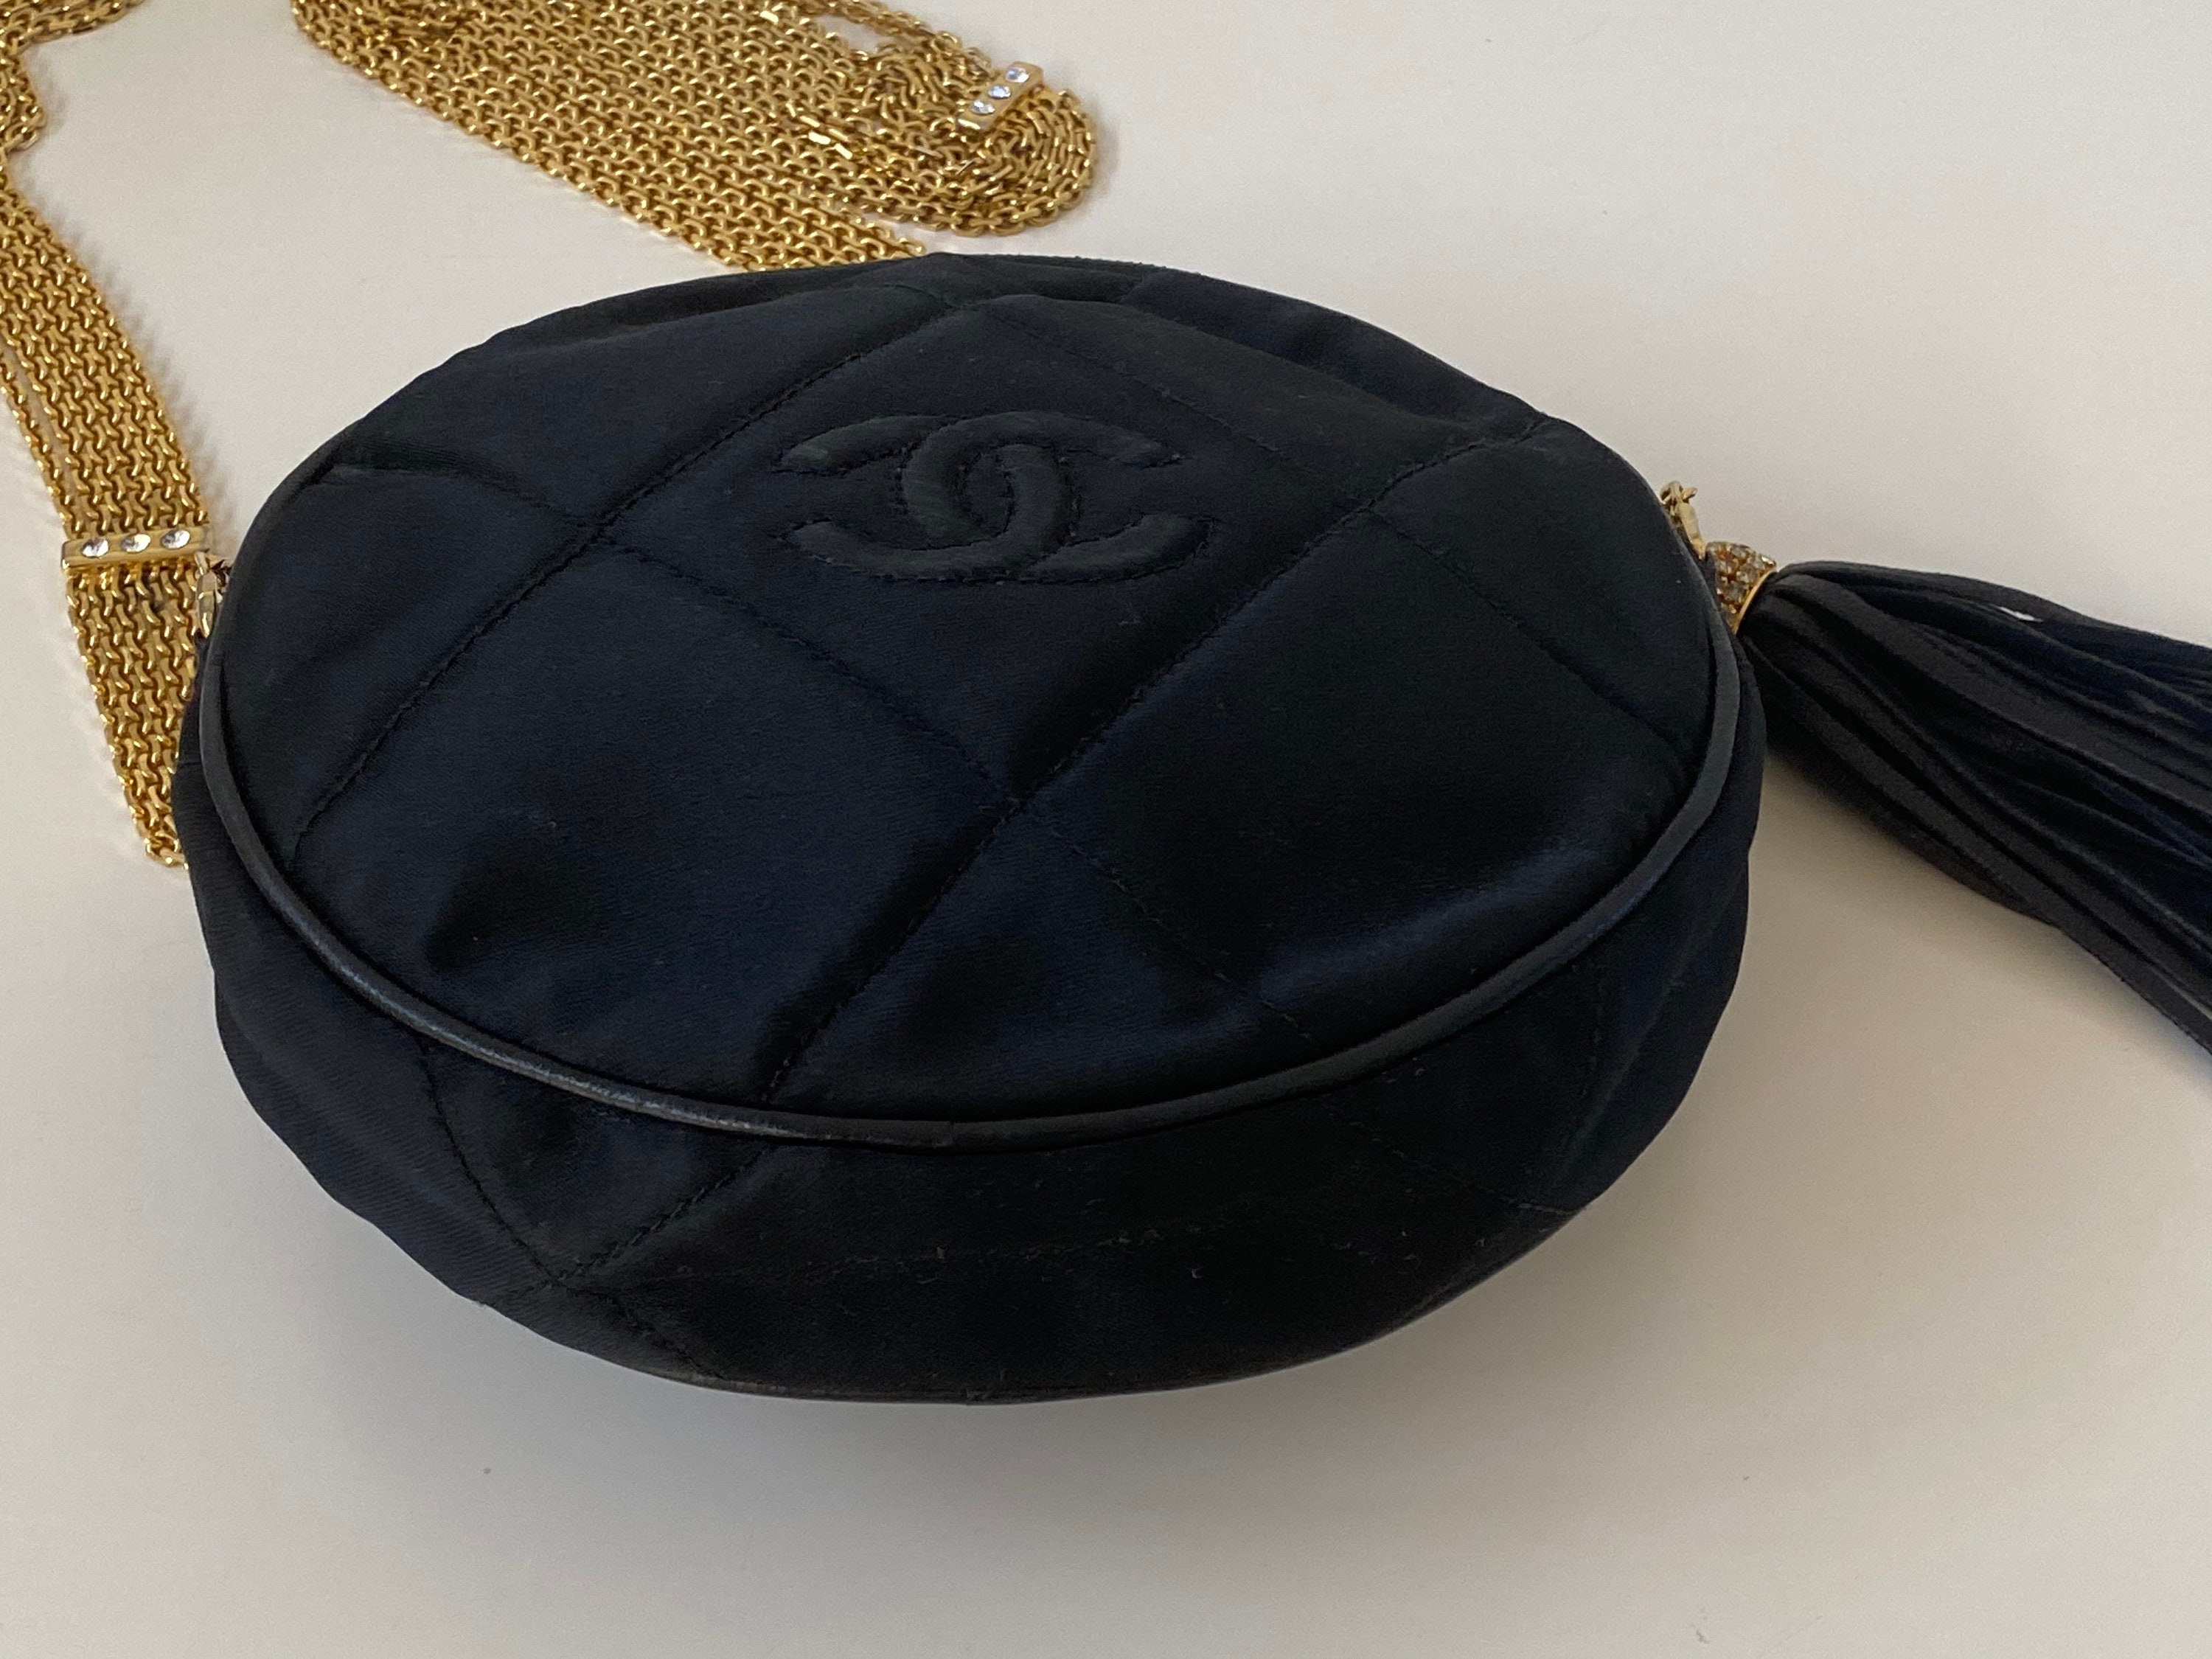 Chanel vintage Shoulder Bag Authentic for Sale in Chicago, IL - OfferUp